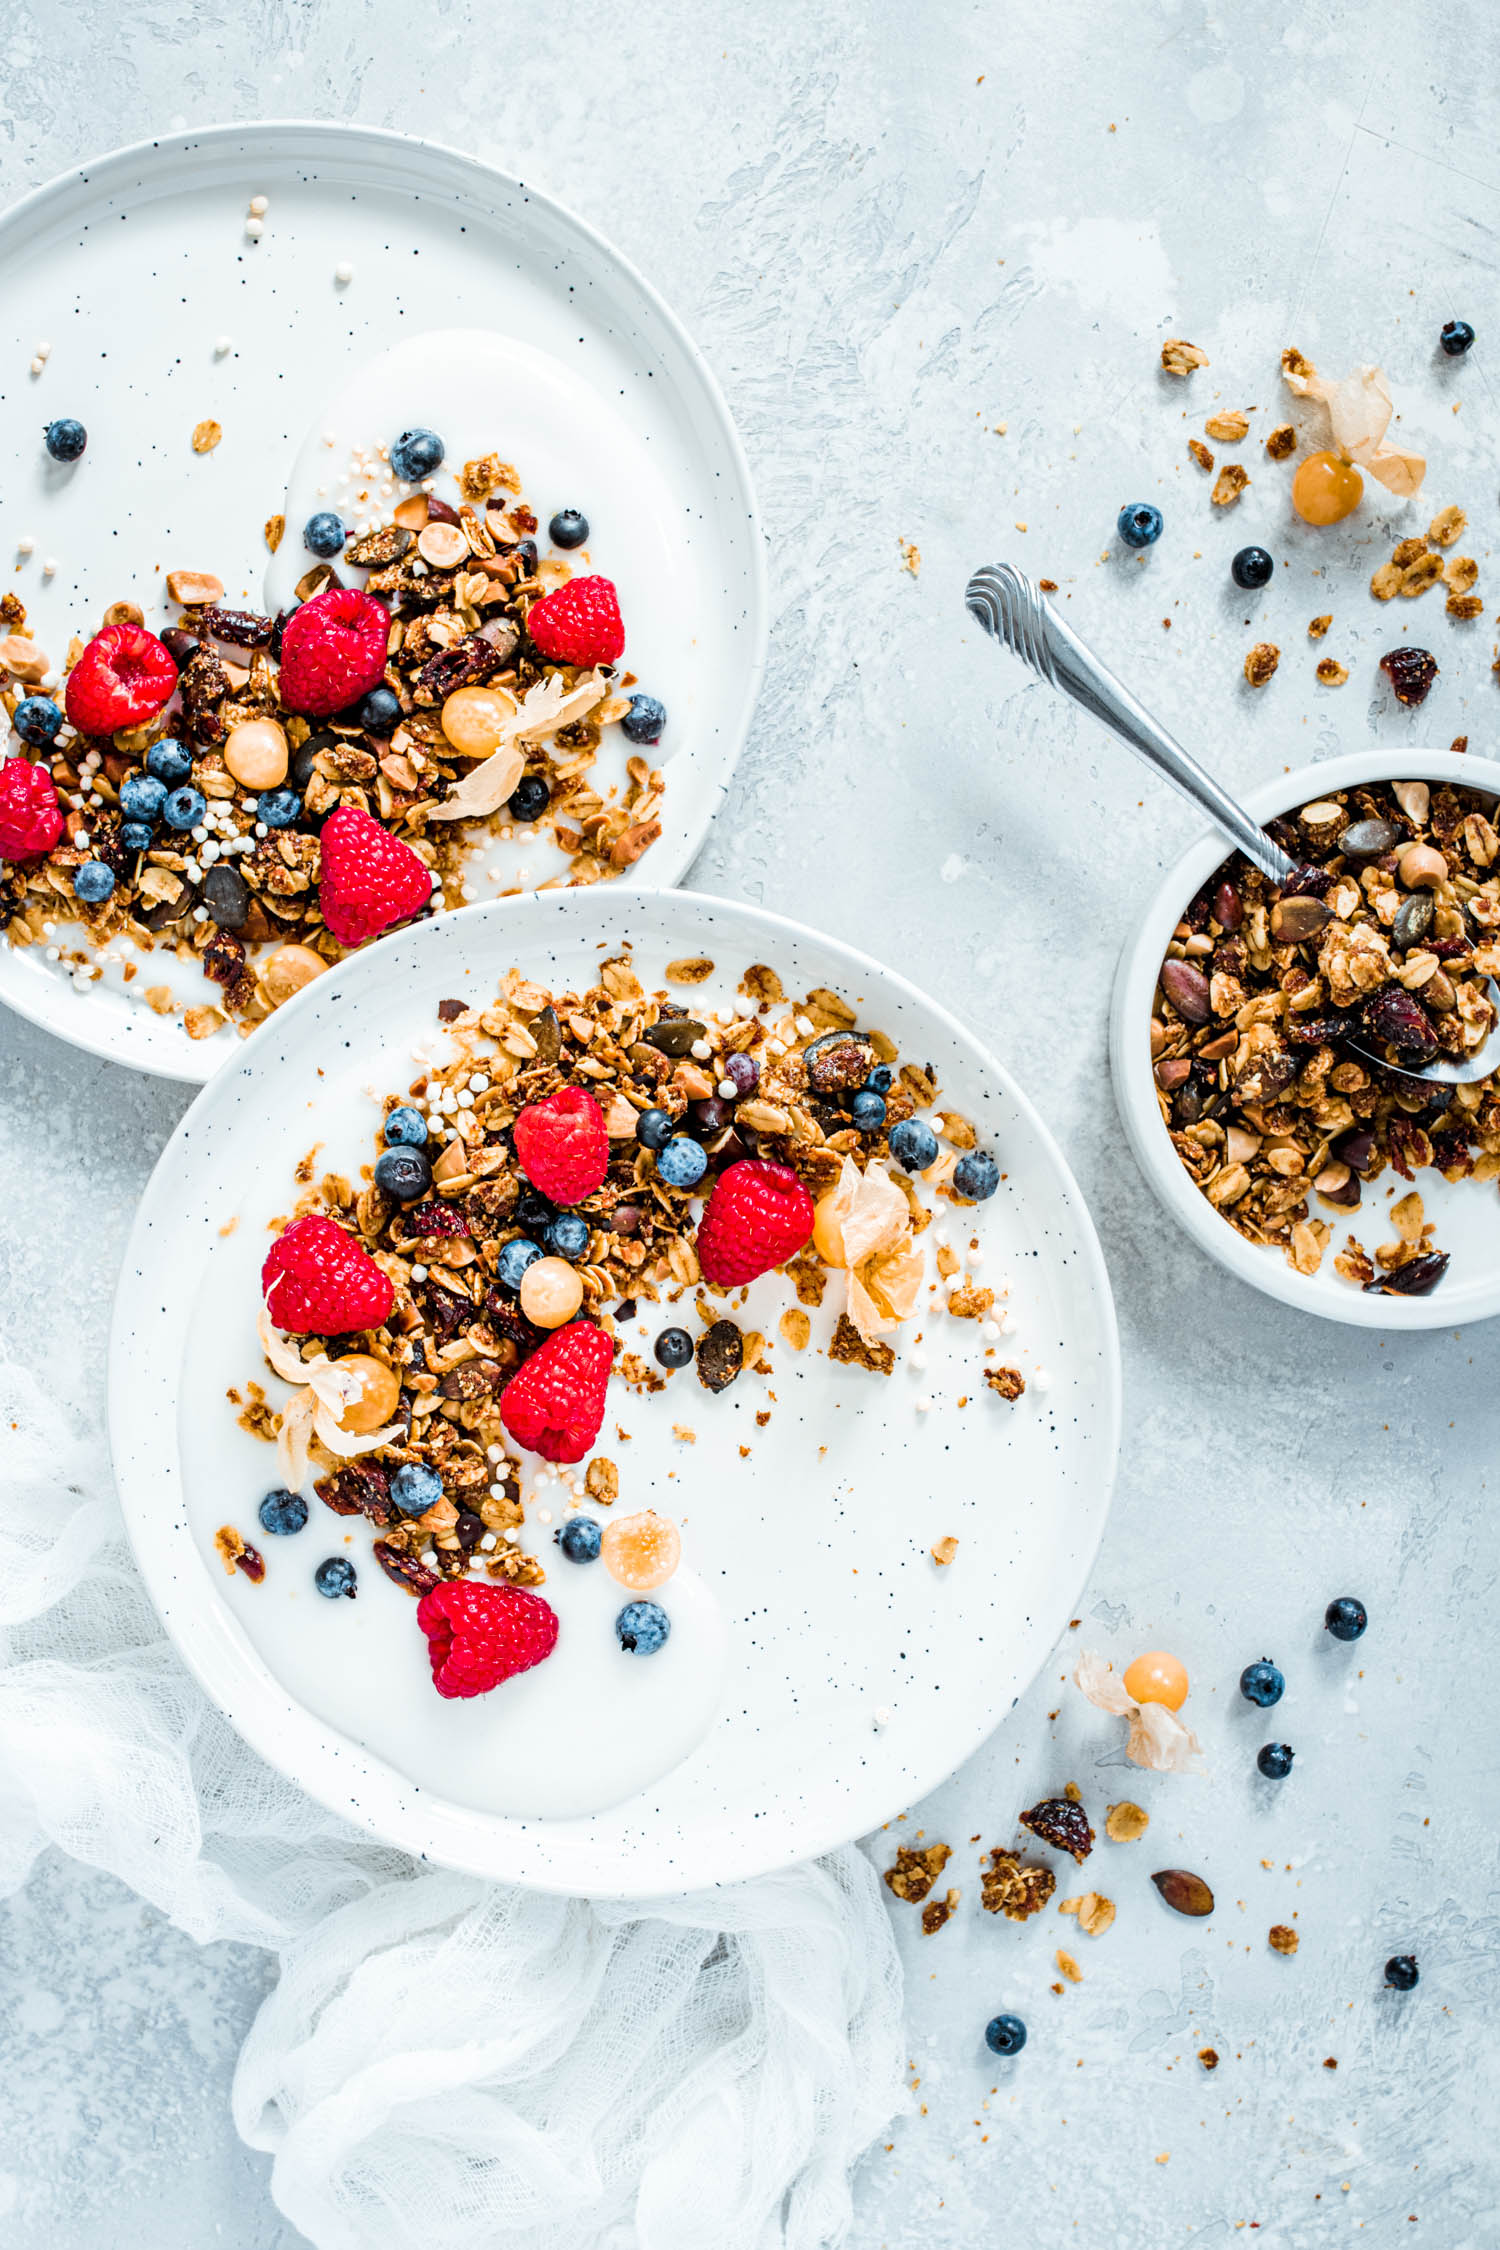 Nut free granola in a bowl with yogurt and berries